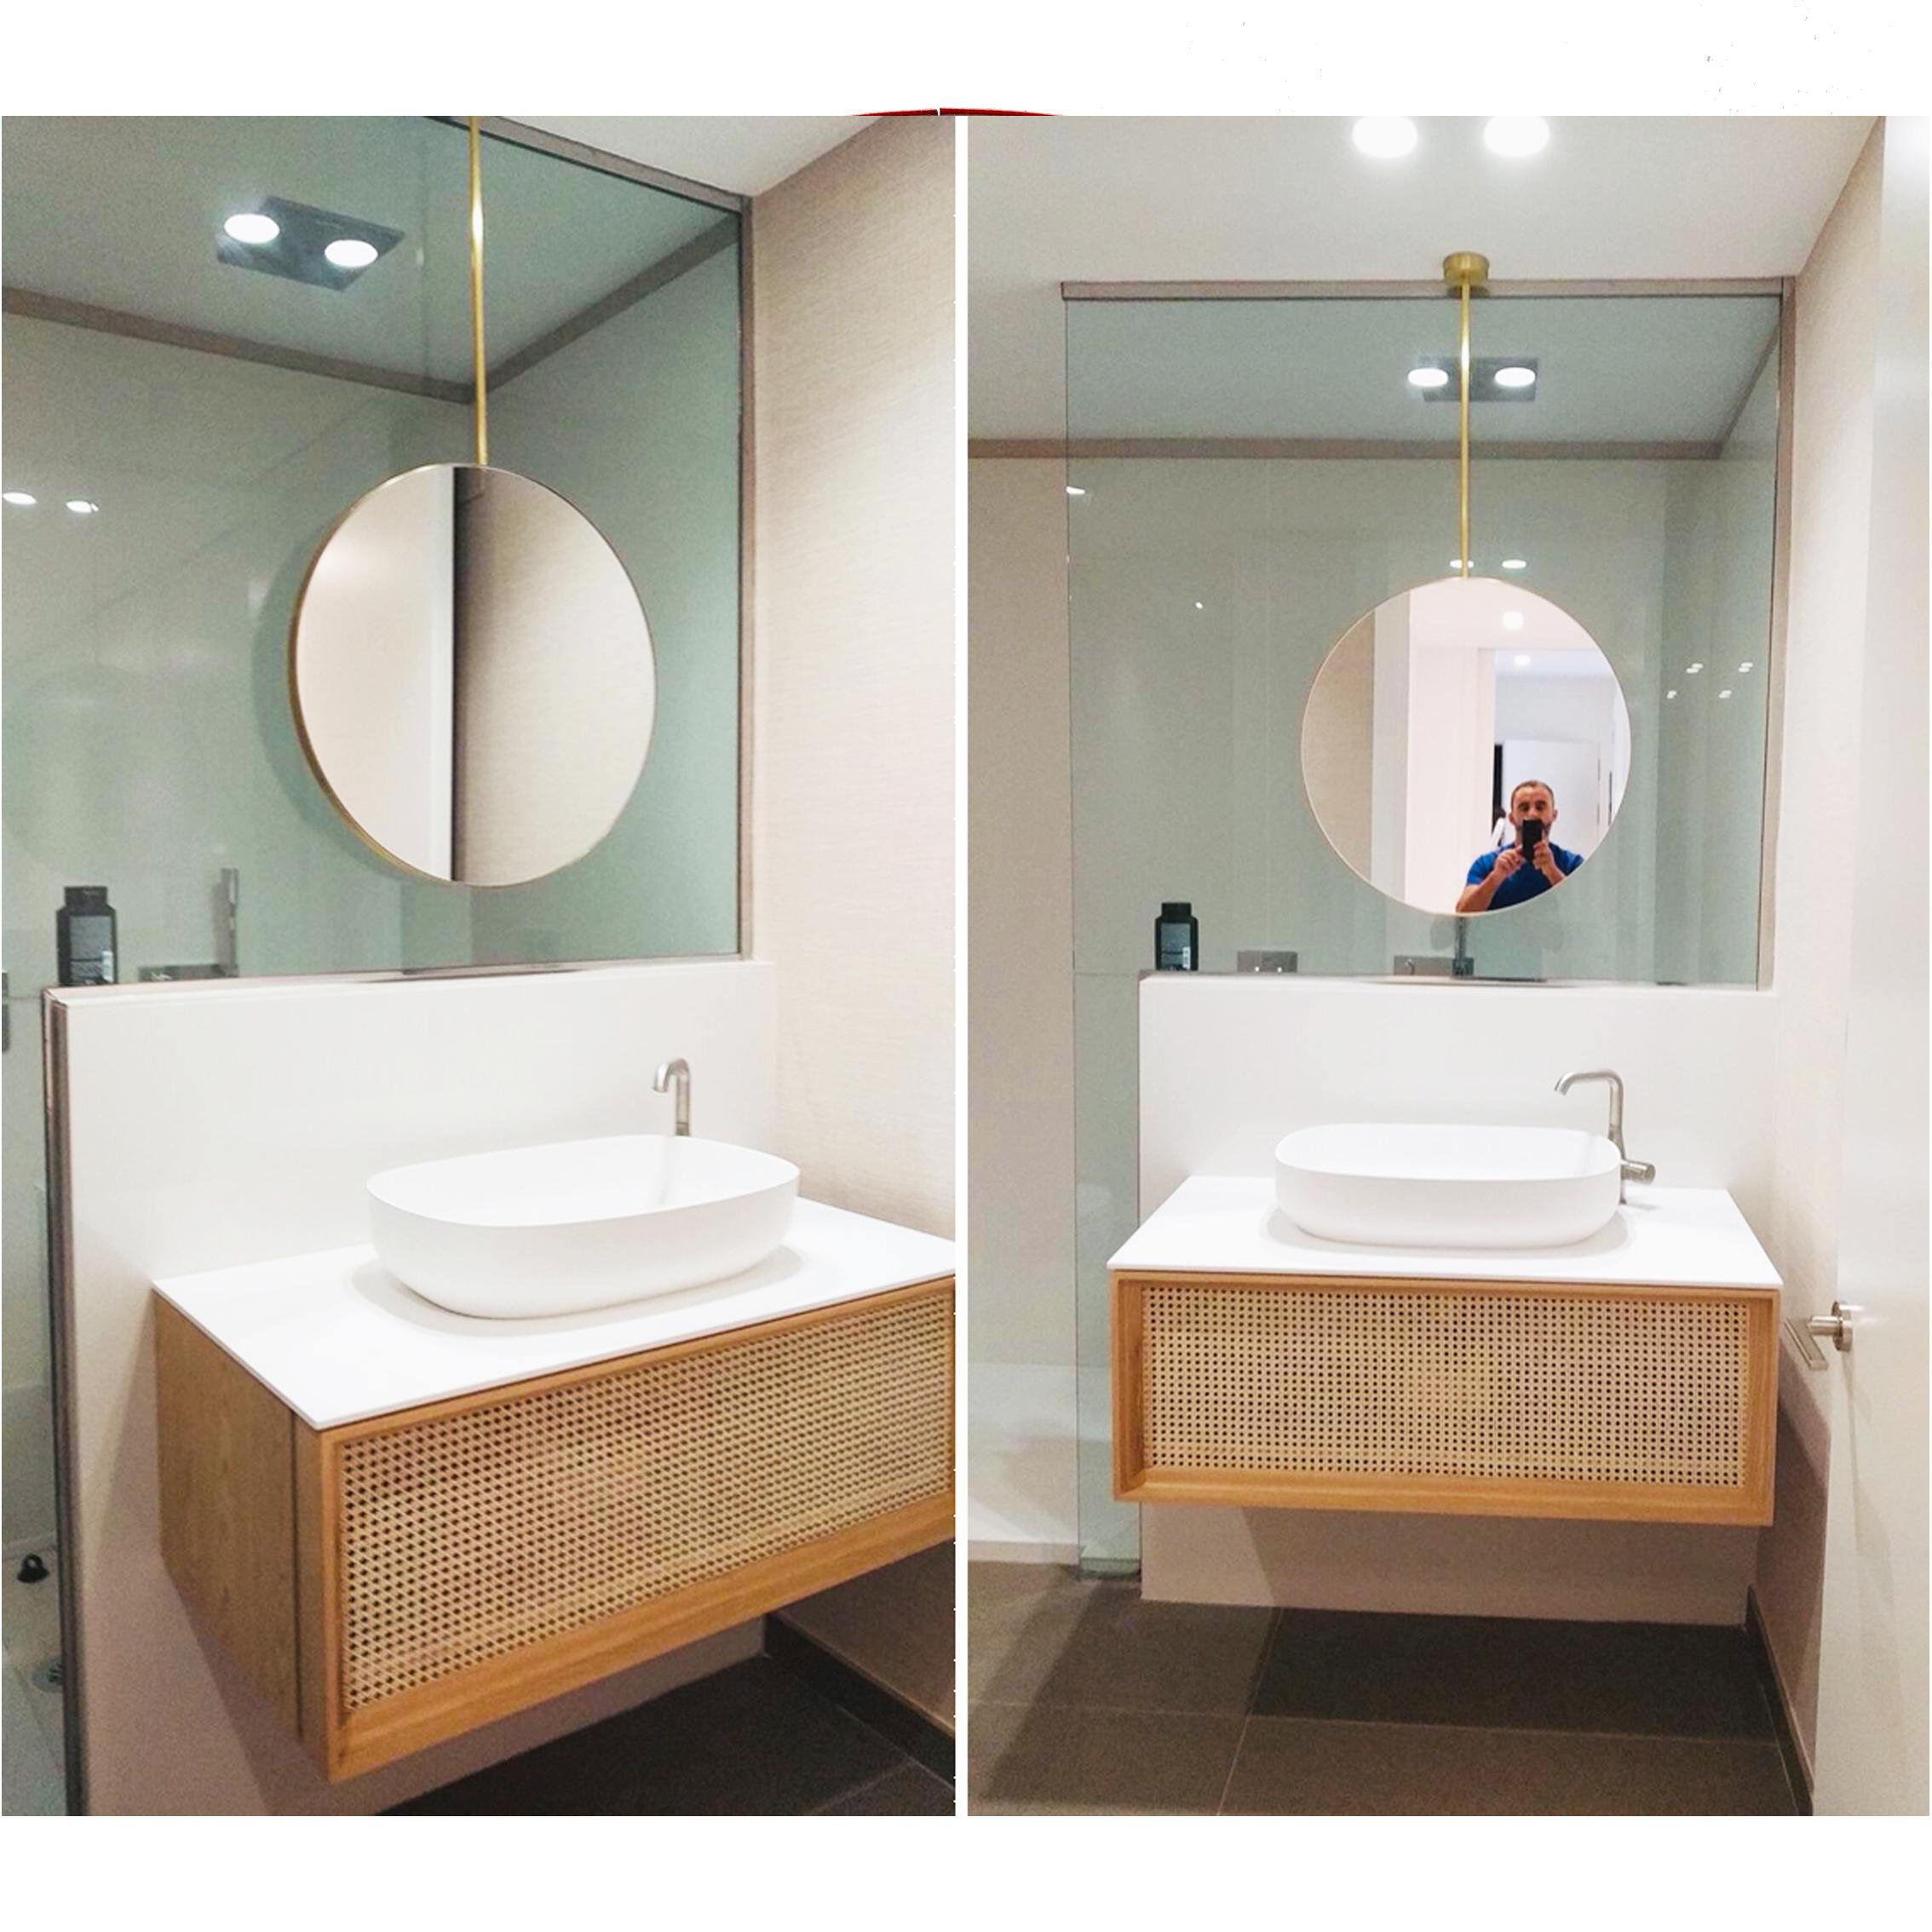 Orbis™ Round Double Sided Suspended Bathroom Mirror with a Brass Frame 5